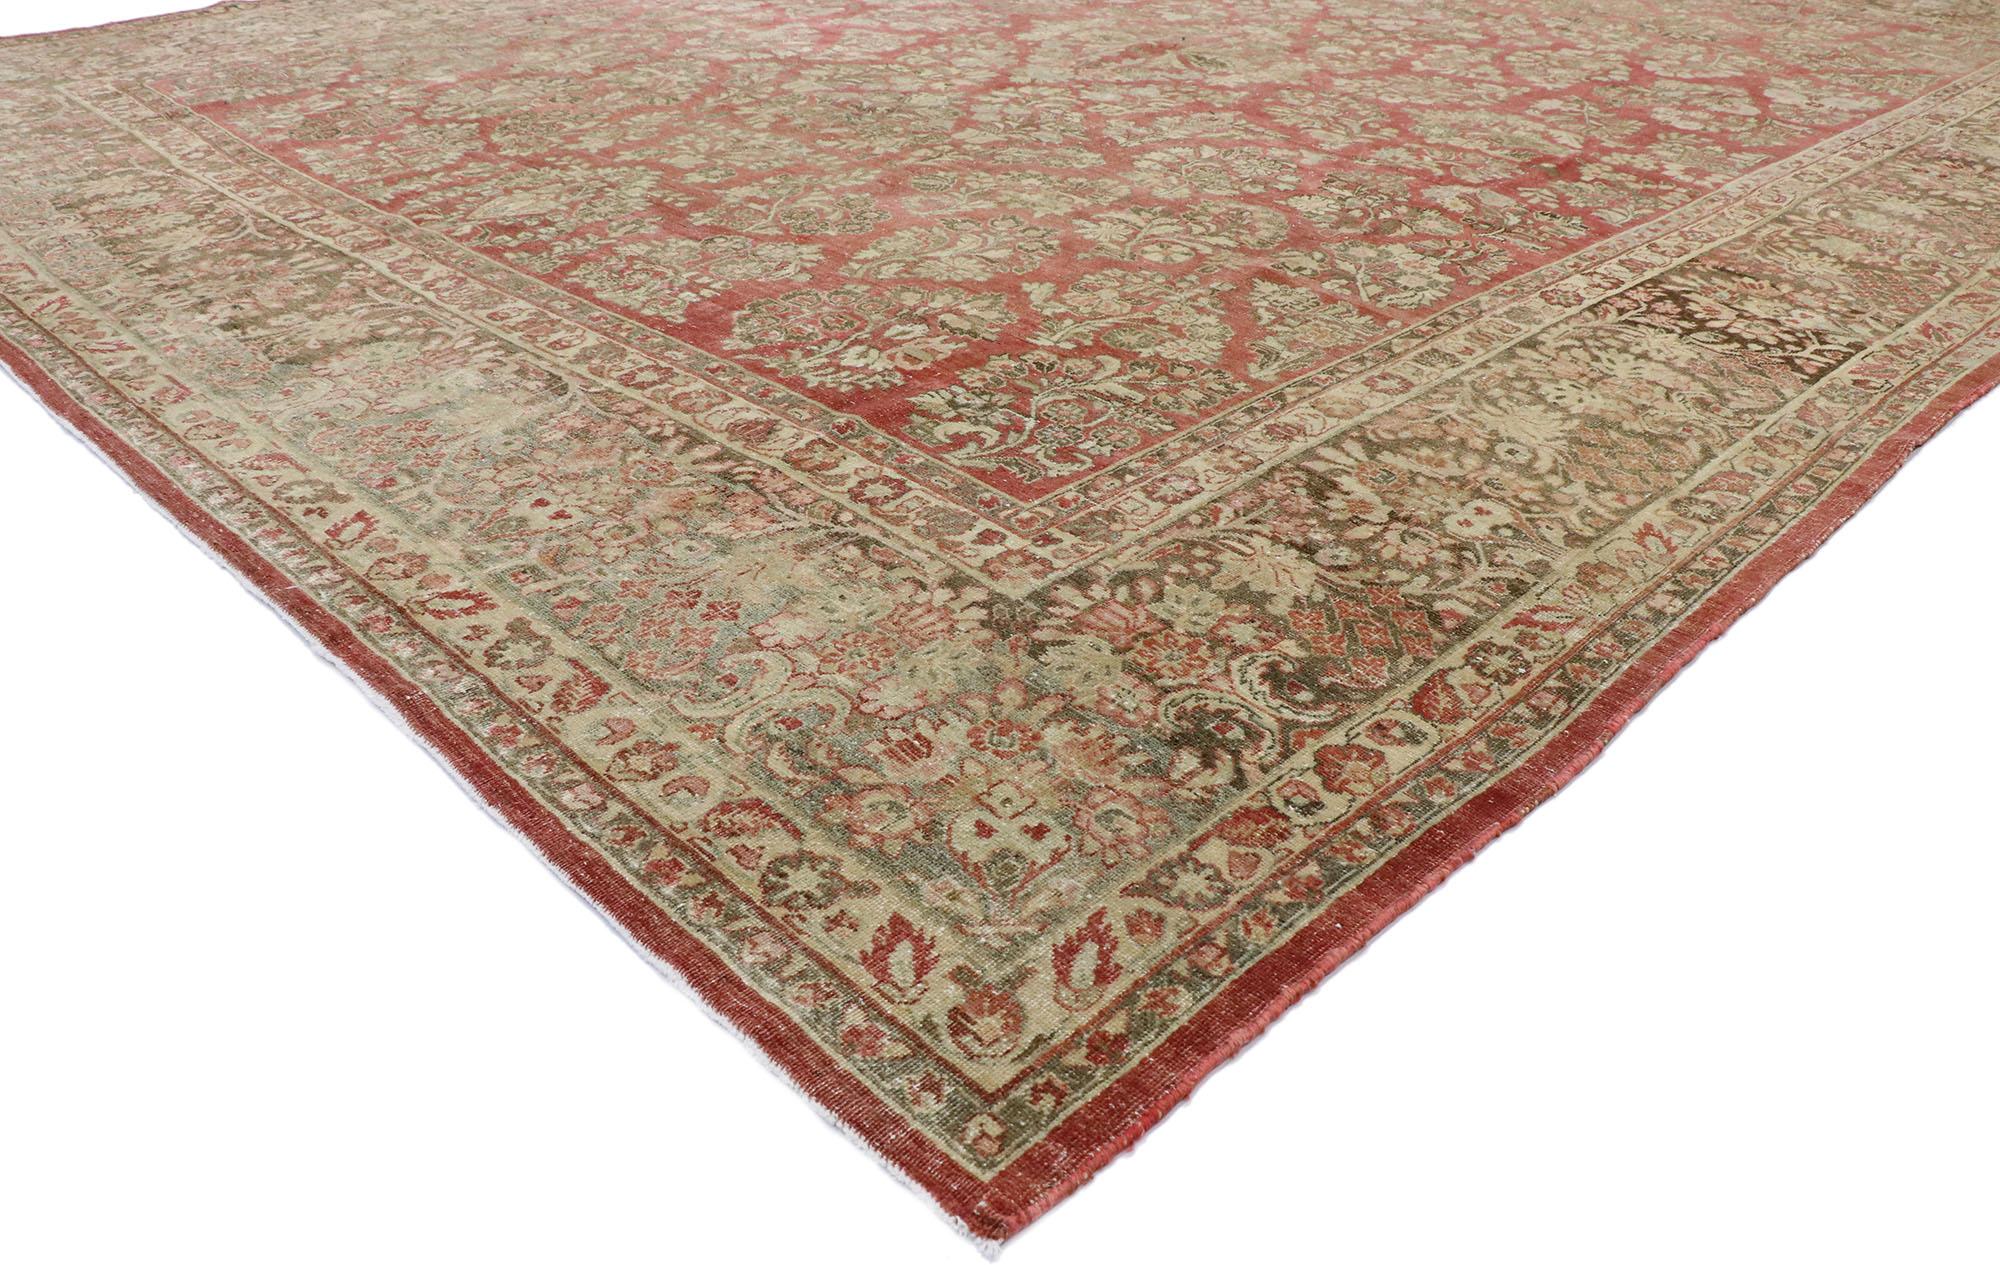 53445, distressed antique Persian Sarouk rug with rustic American traditional style. With timeless appeal, soft colors, and naturalistic design elements, this hand knotted wool distressed antique Persian Sarouk rug can beautifully blend modern,